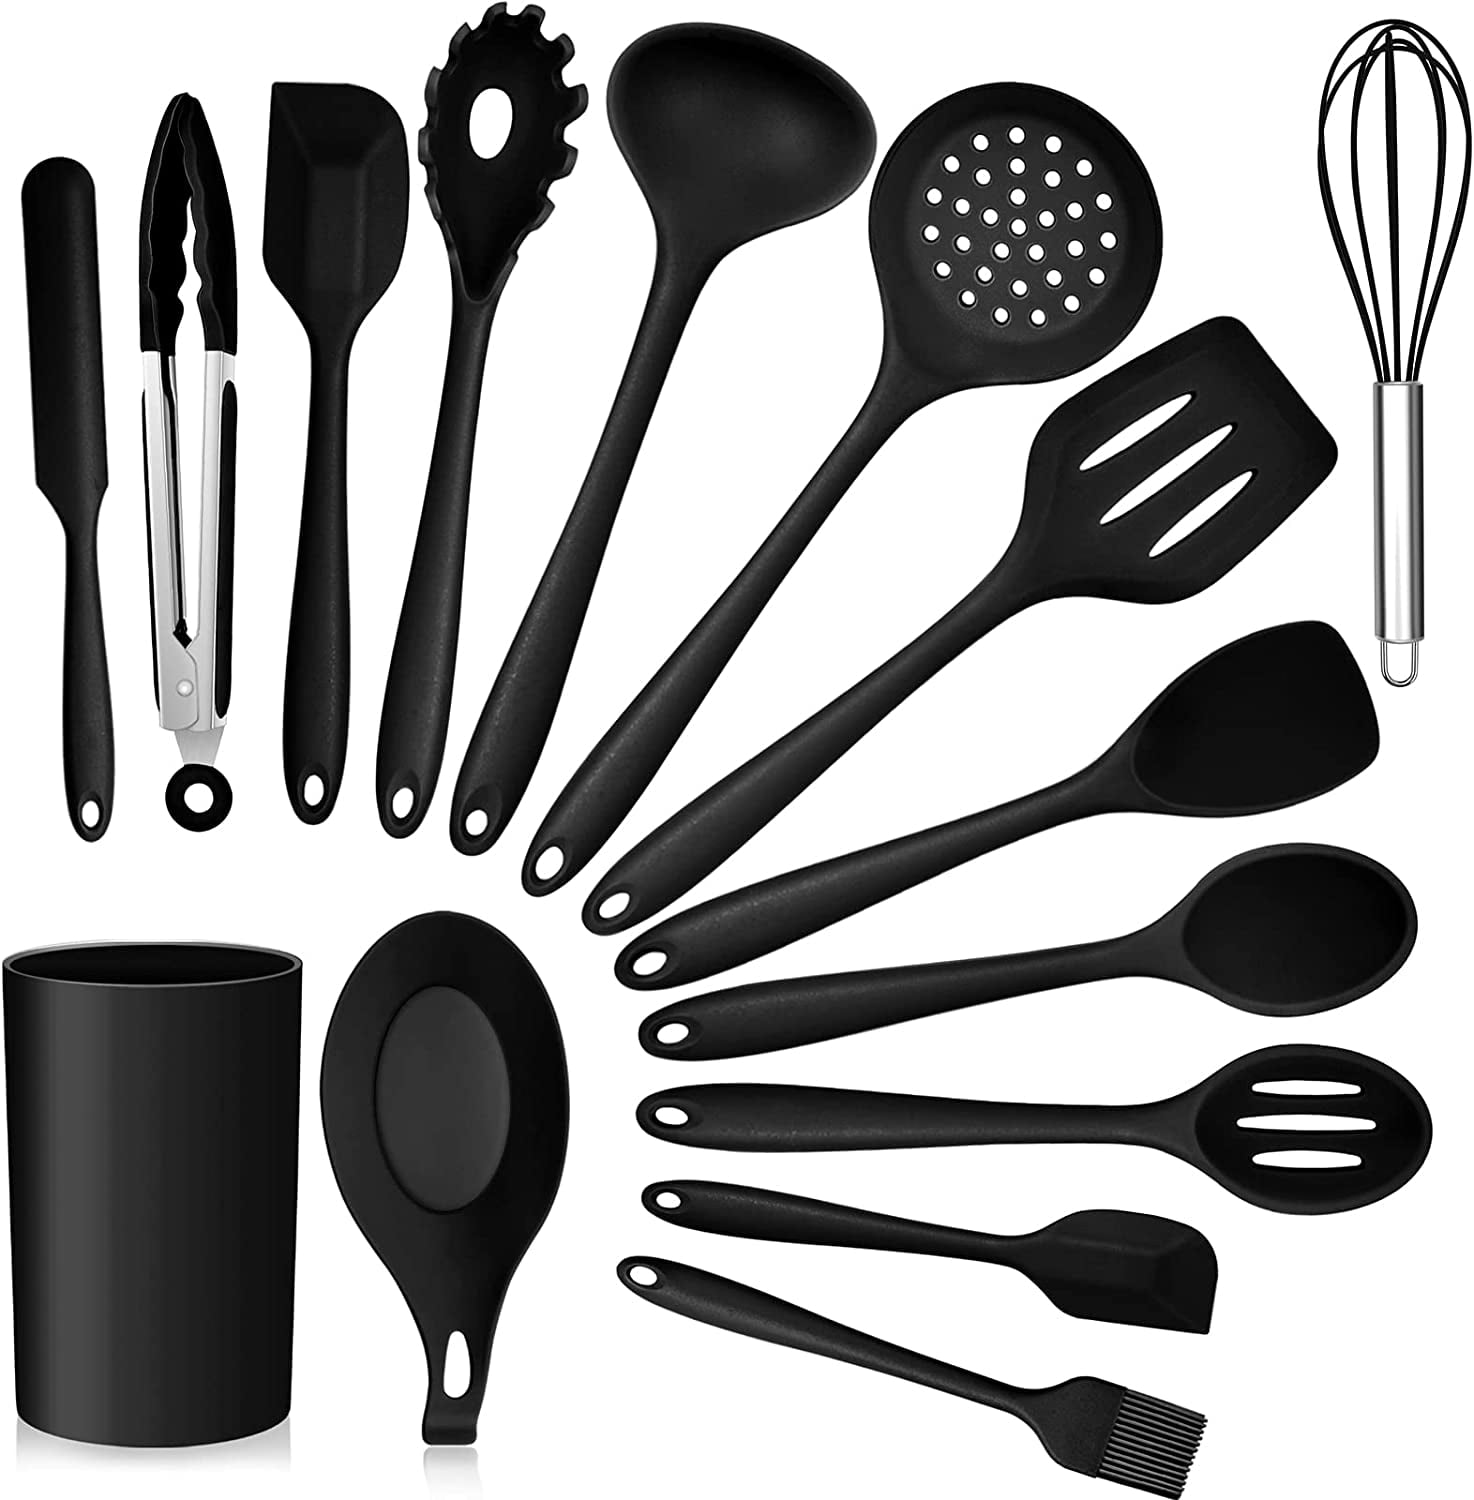 COOKLOVER Non-Stick Cookware 15-PC Set w/ Cooking Utensil Pack